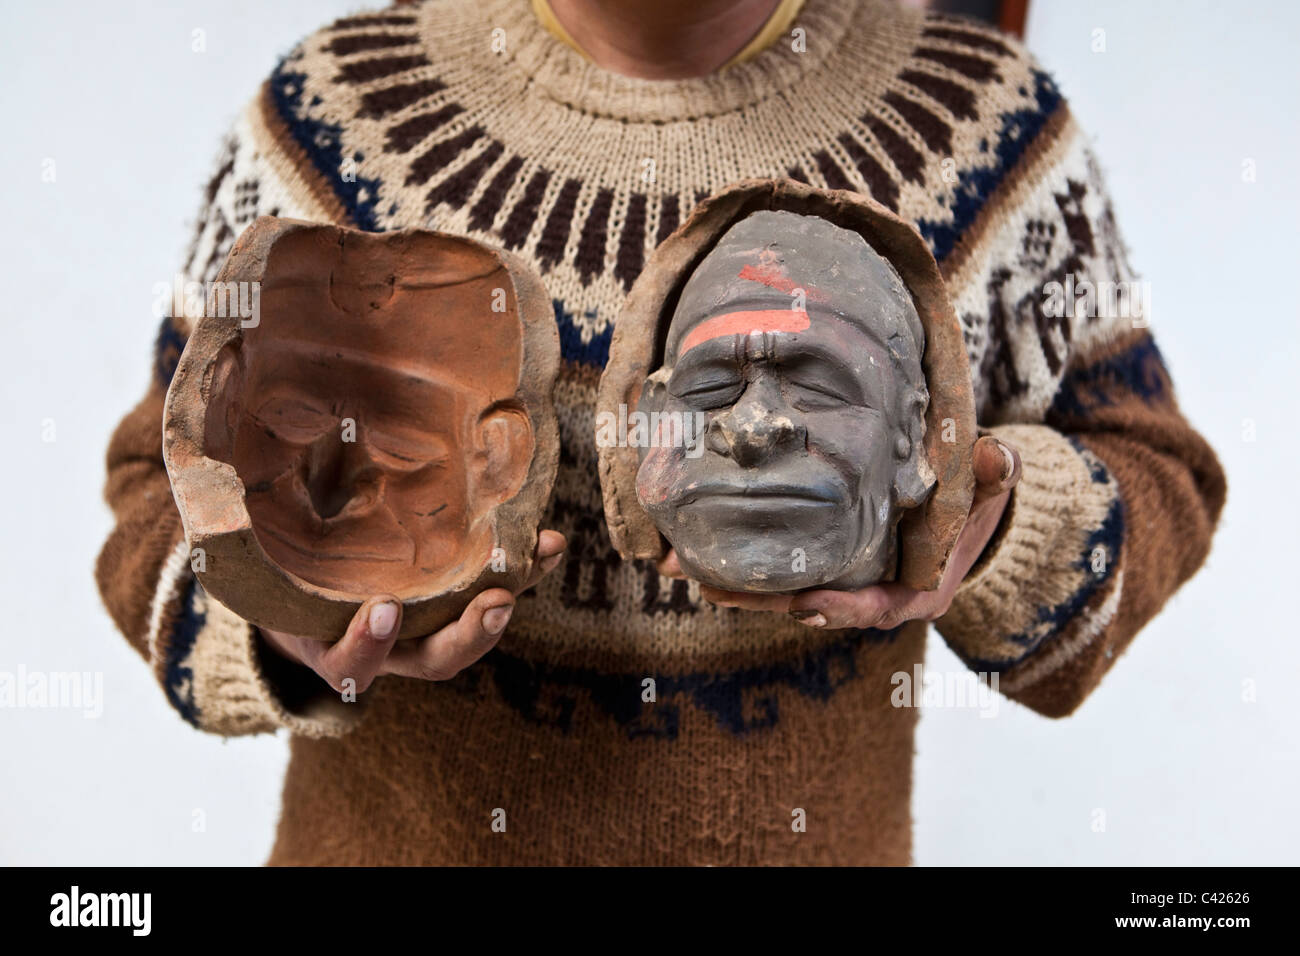 Peru, Trujillo, Replica of mould from Moche culture, roughly between 200 and 850 AD, showing portrait of man chewing coca leaves Stock Photo